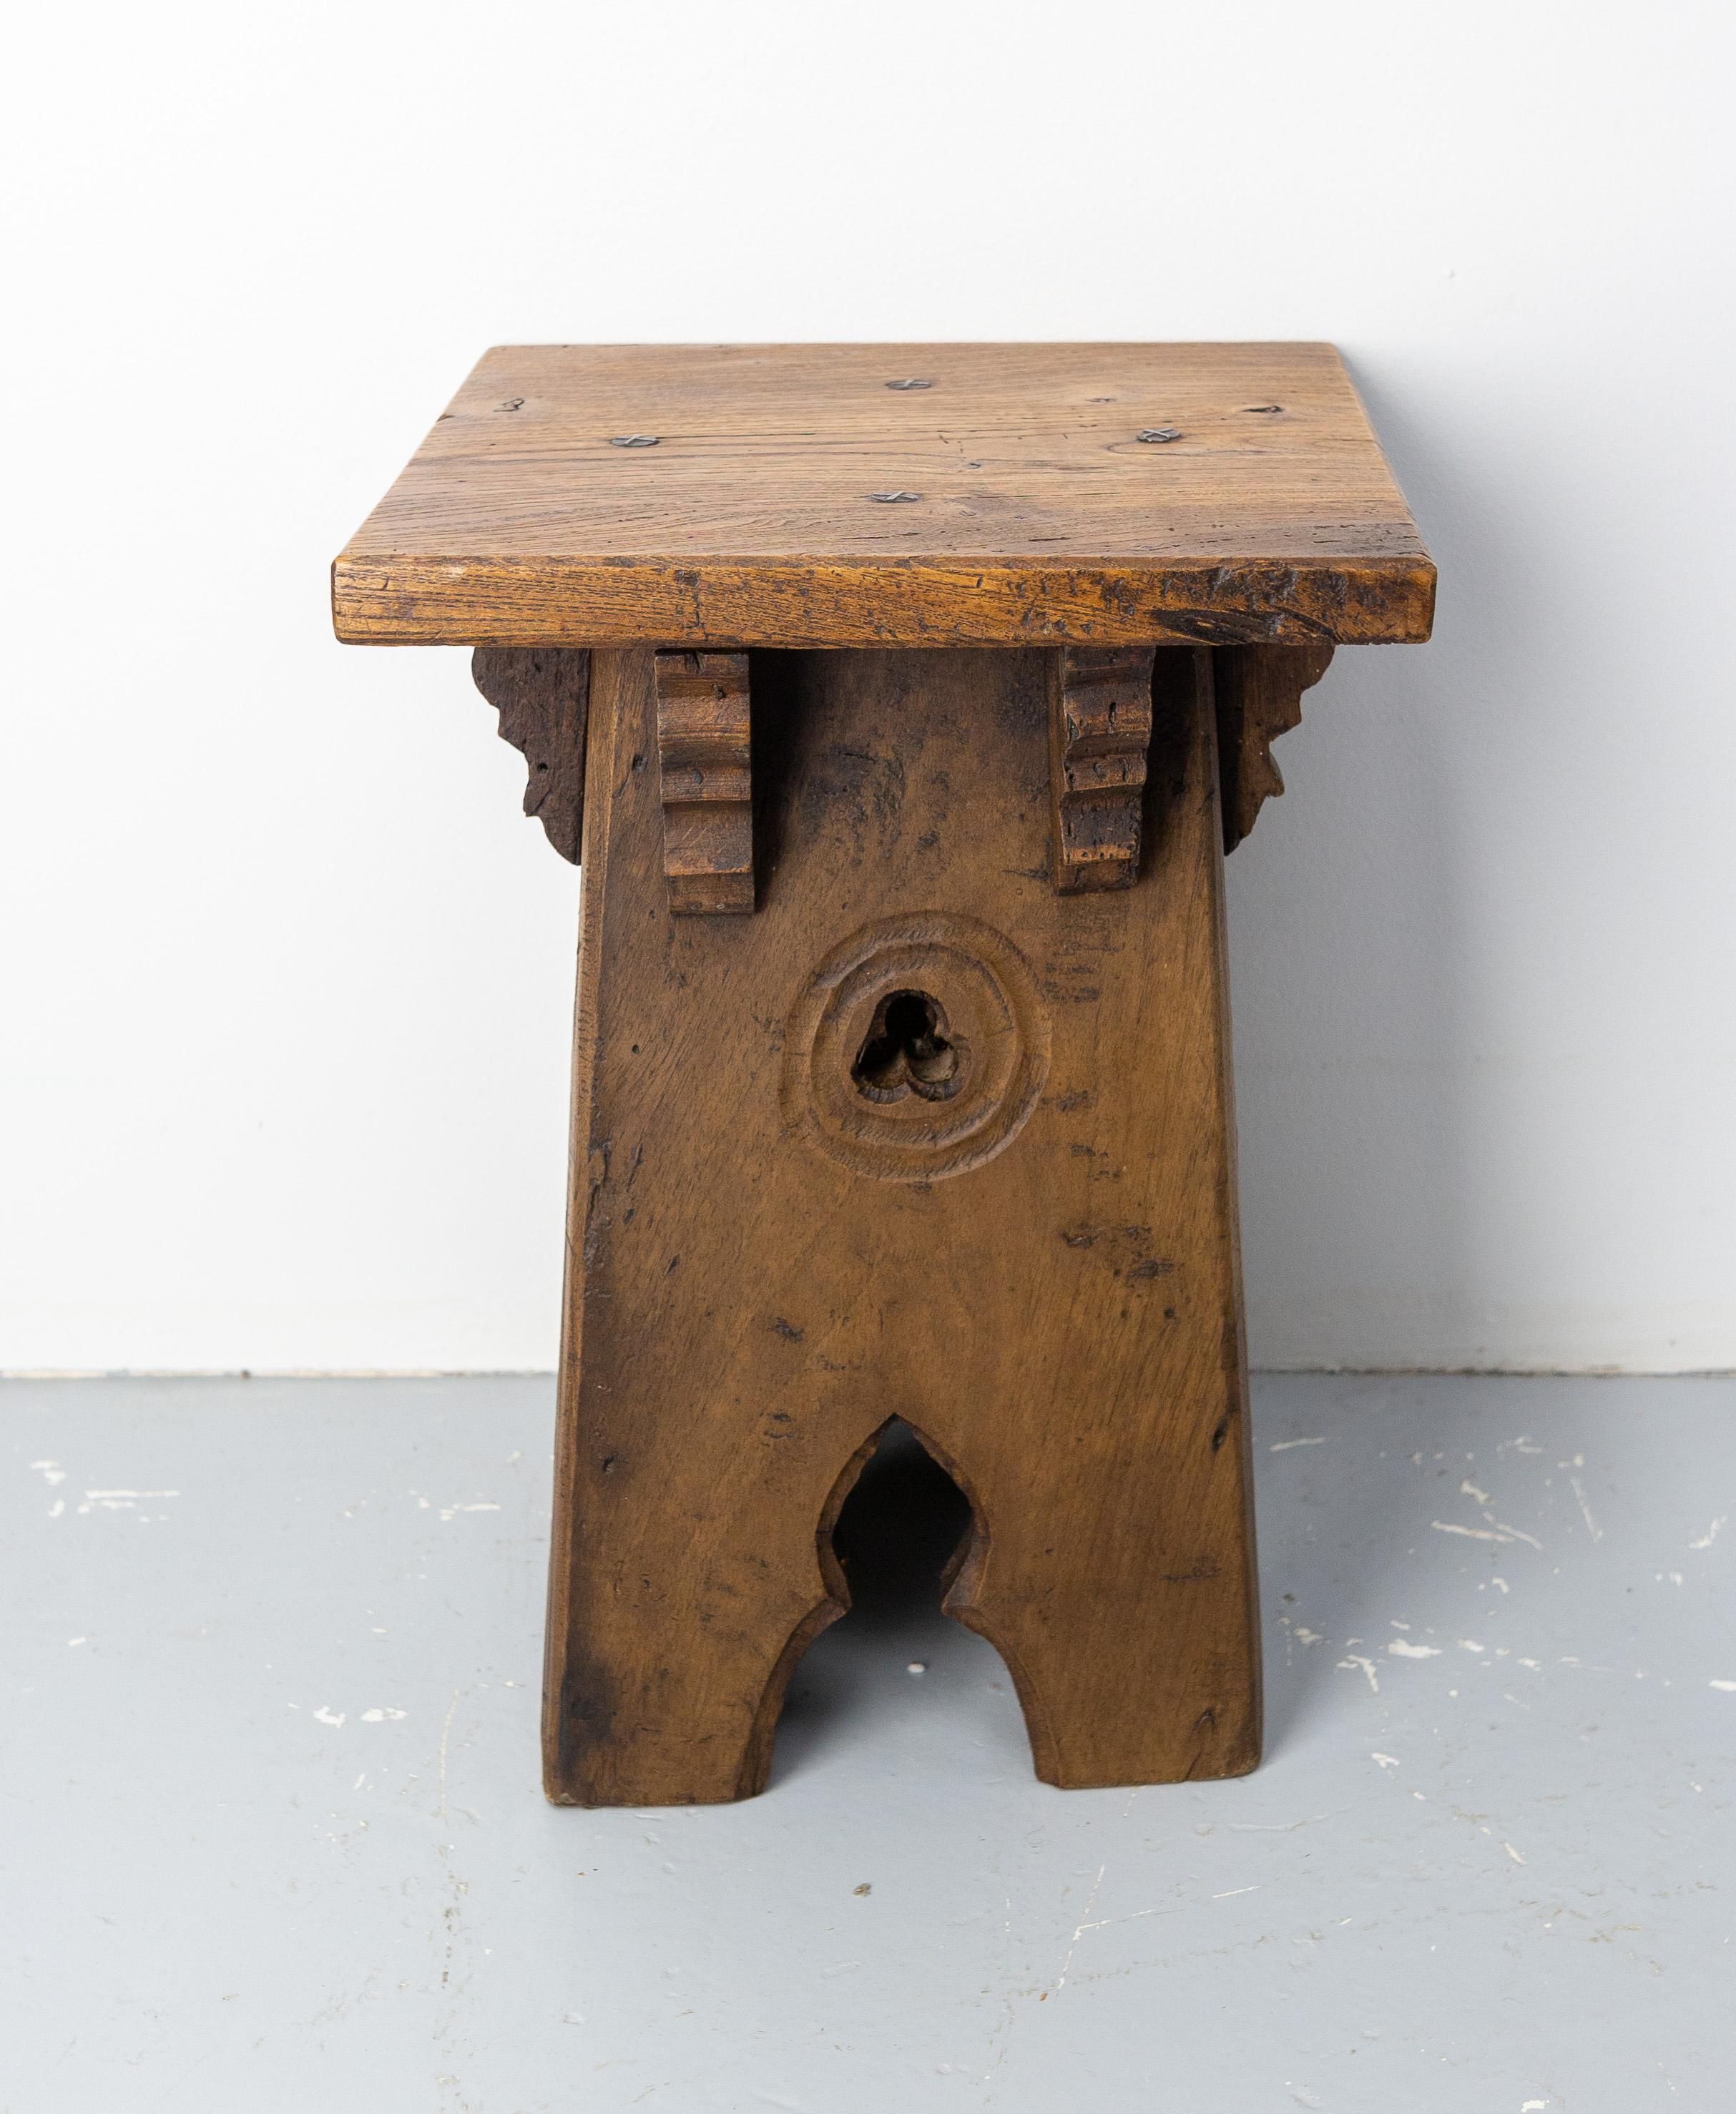 Oak carved stool made circa 1920
French

Good condition, solid and sound.

Shipping:
L 28, P 29, H 41 cm 6 kg.